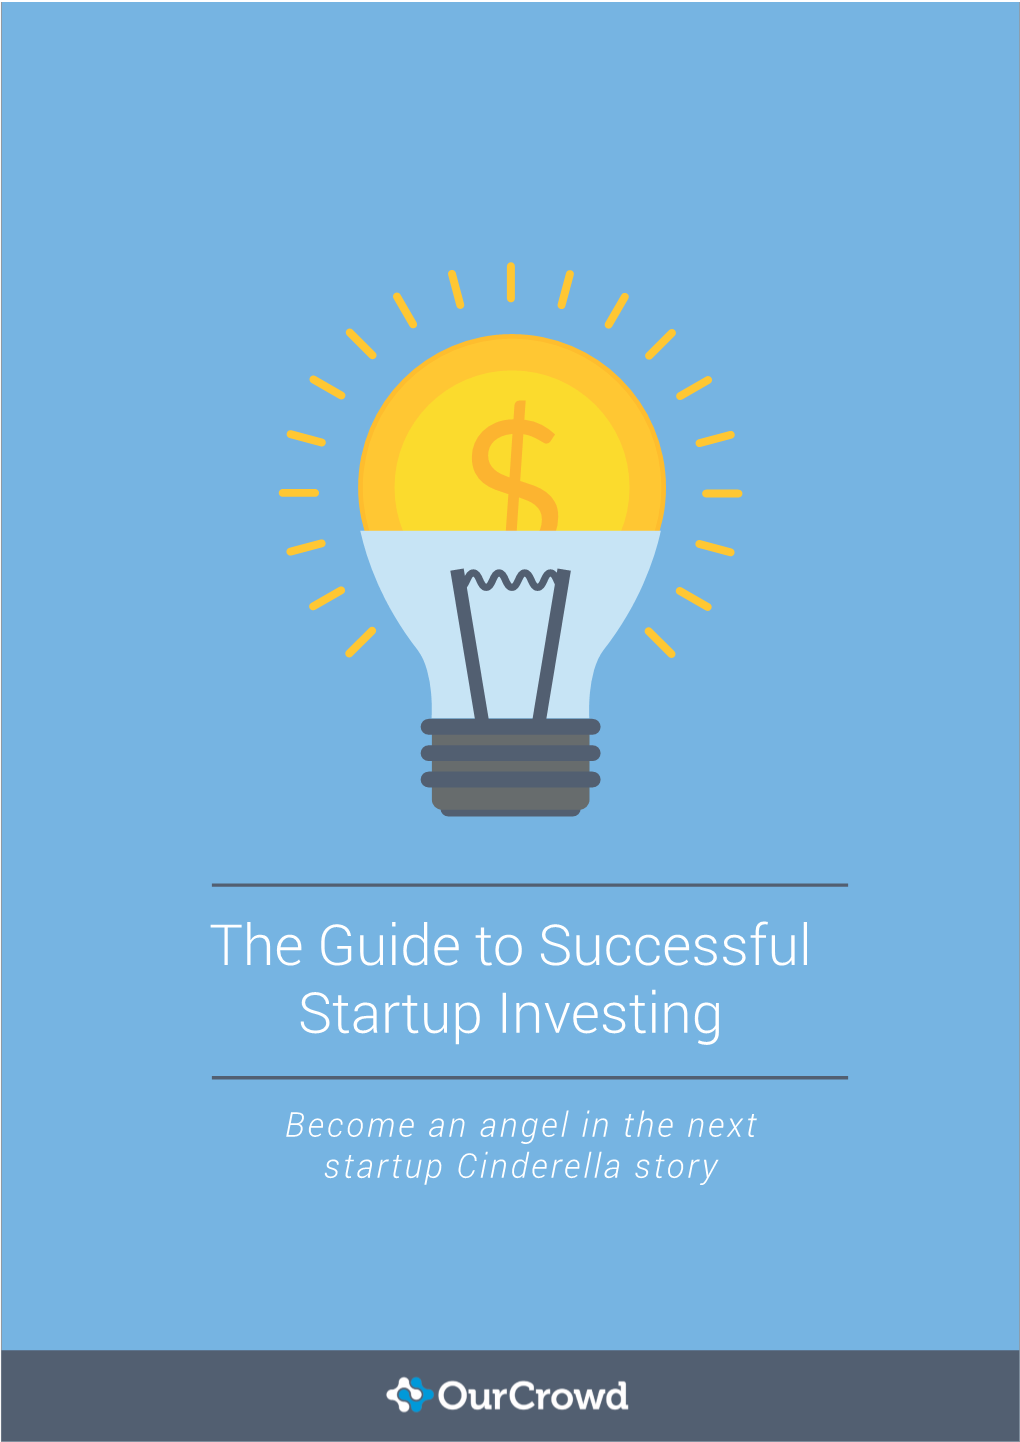 The Guide to Successful Startup Investing